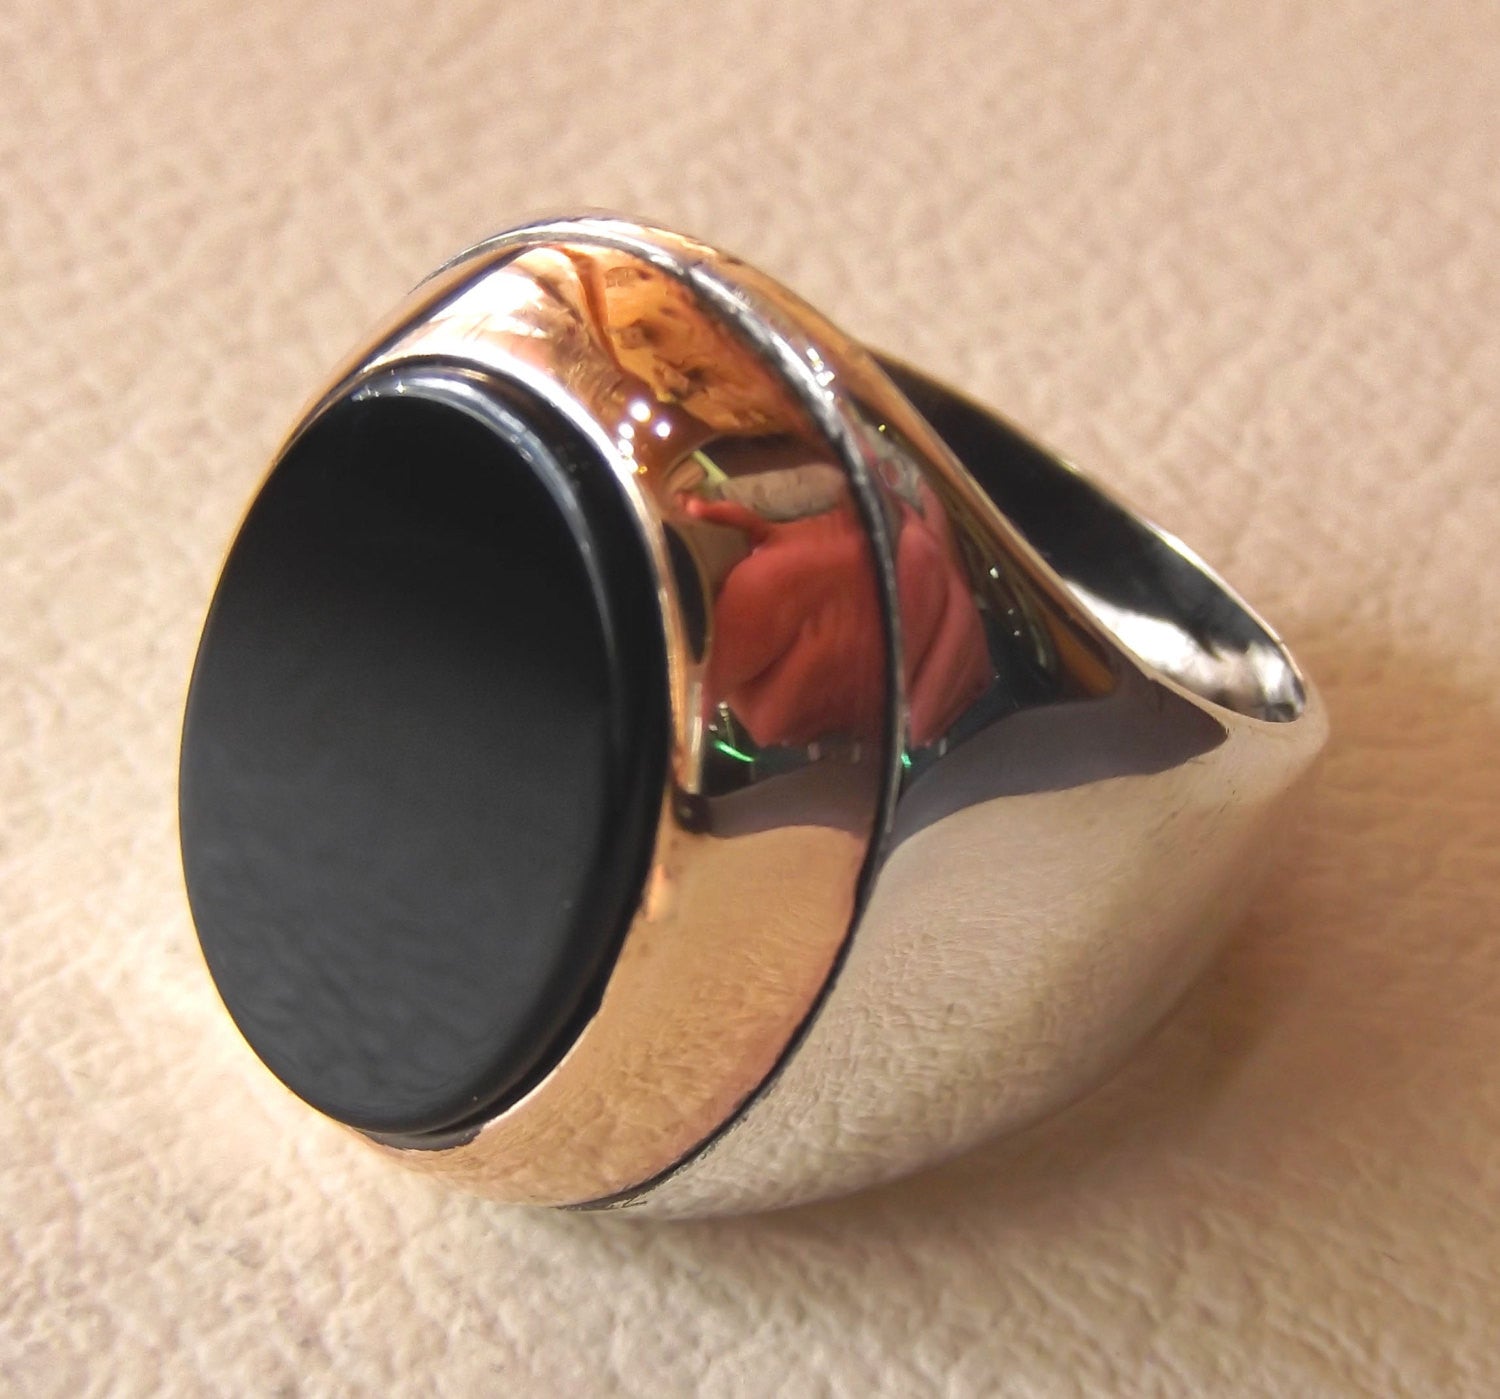 black agate onyx flat aqeeq oval stone heavy big men ring sterling silver 925 bronze frame arabic vintage style all sizes fast shipping